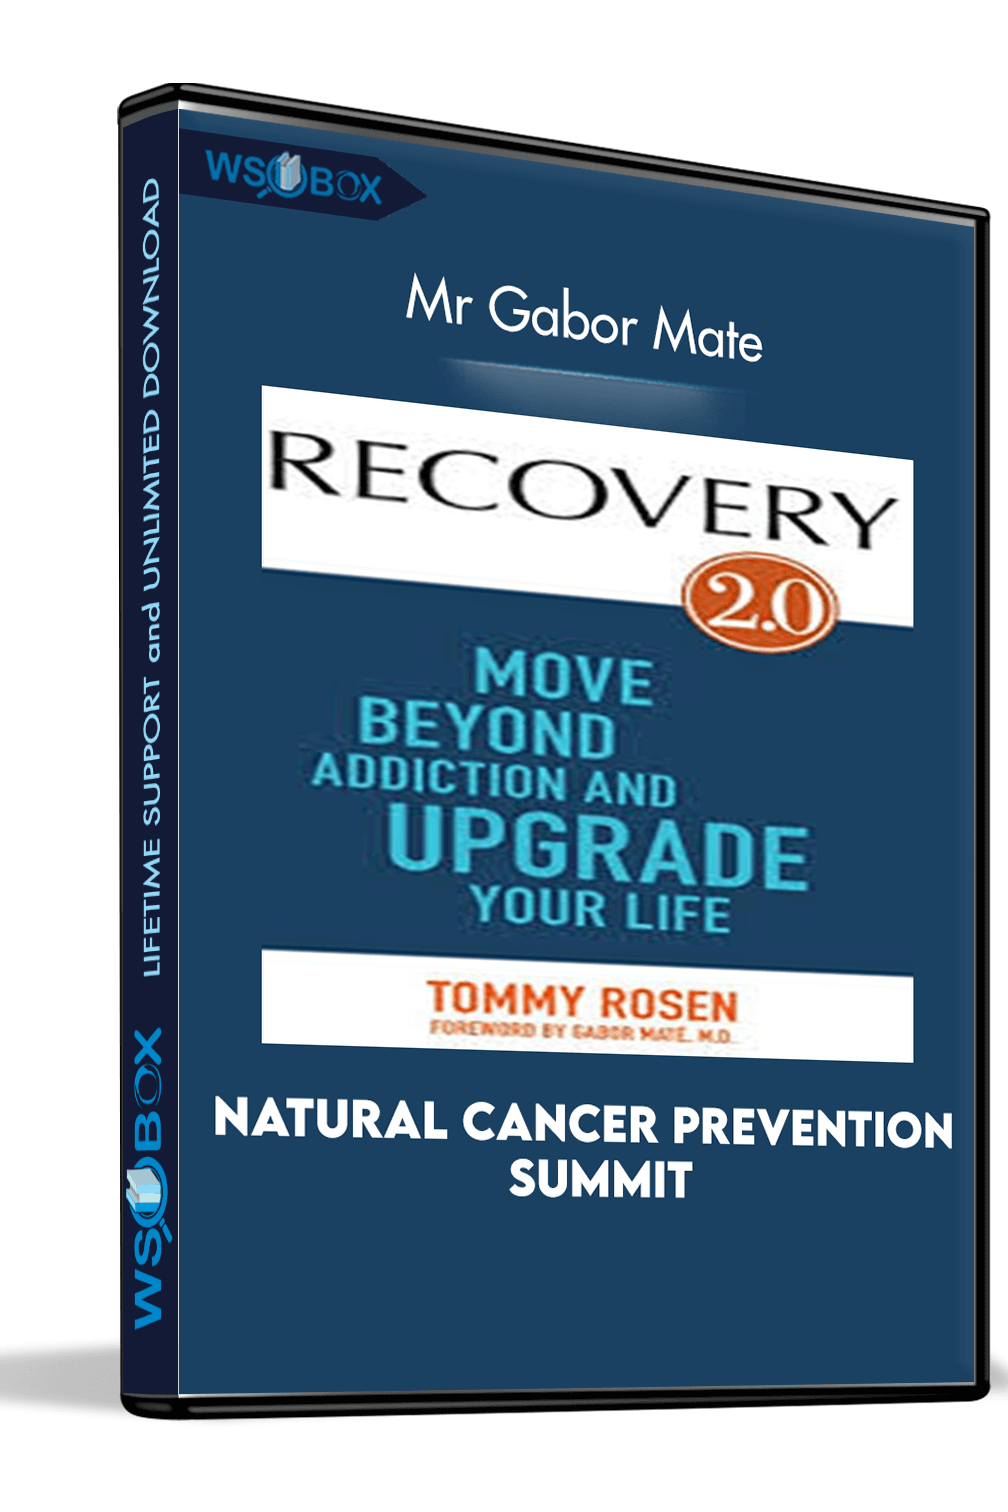 recovery-20-online-conference-2016-mr-gabor-mate